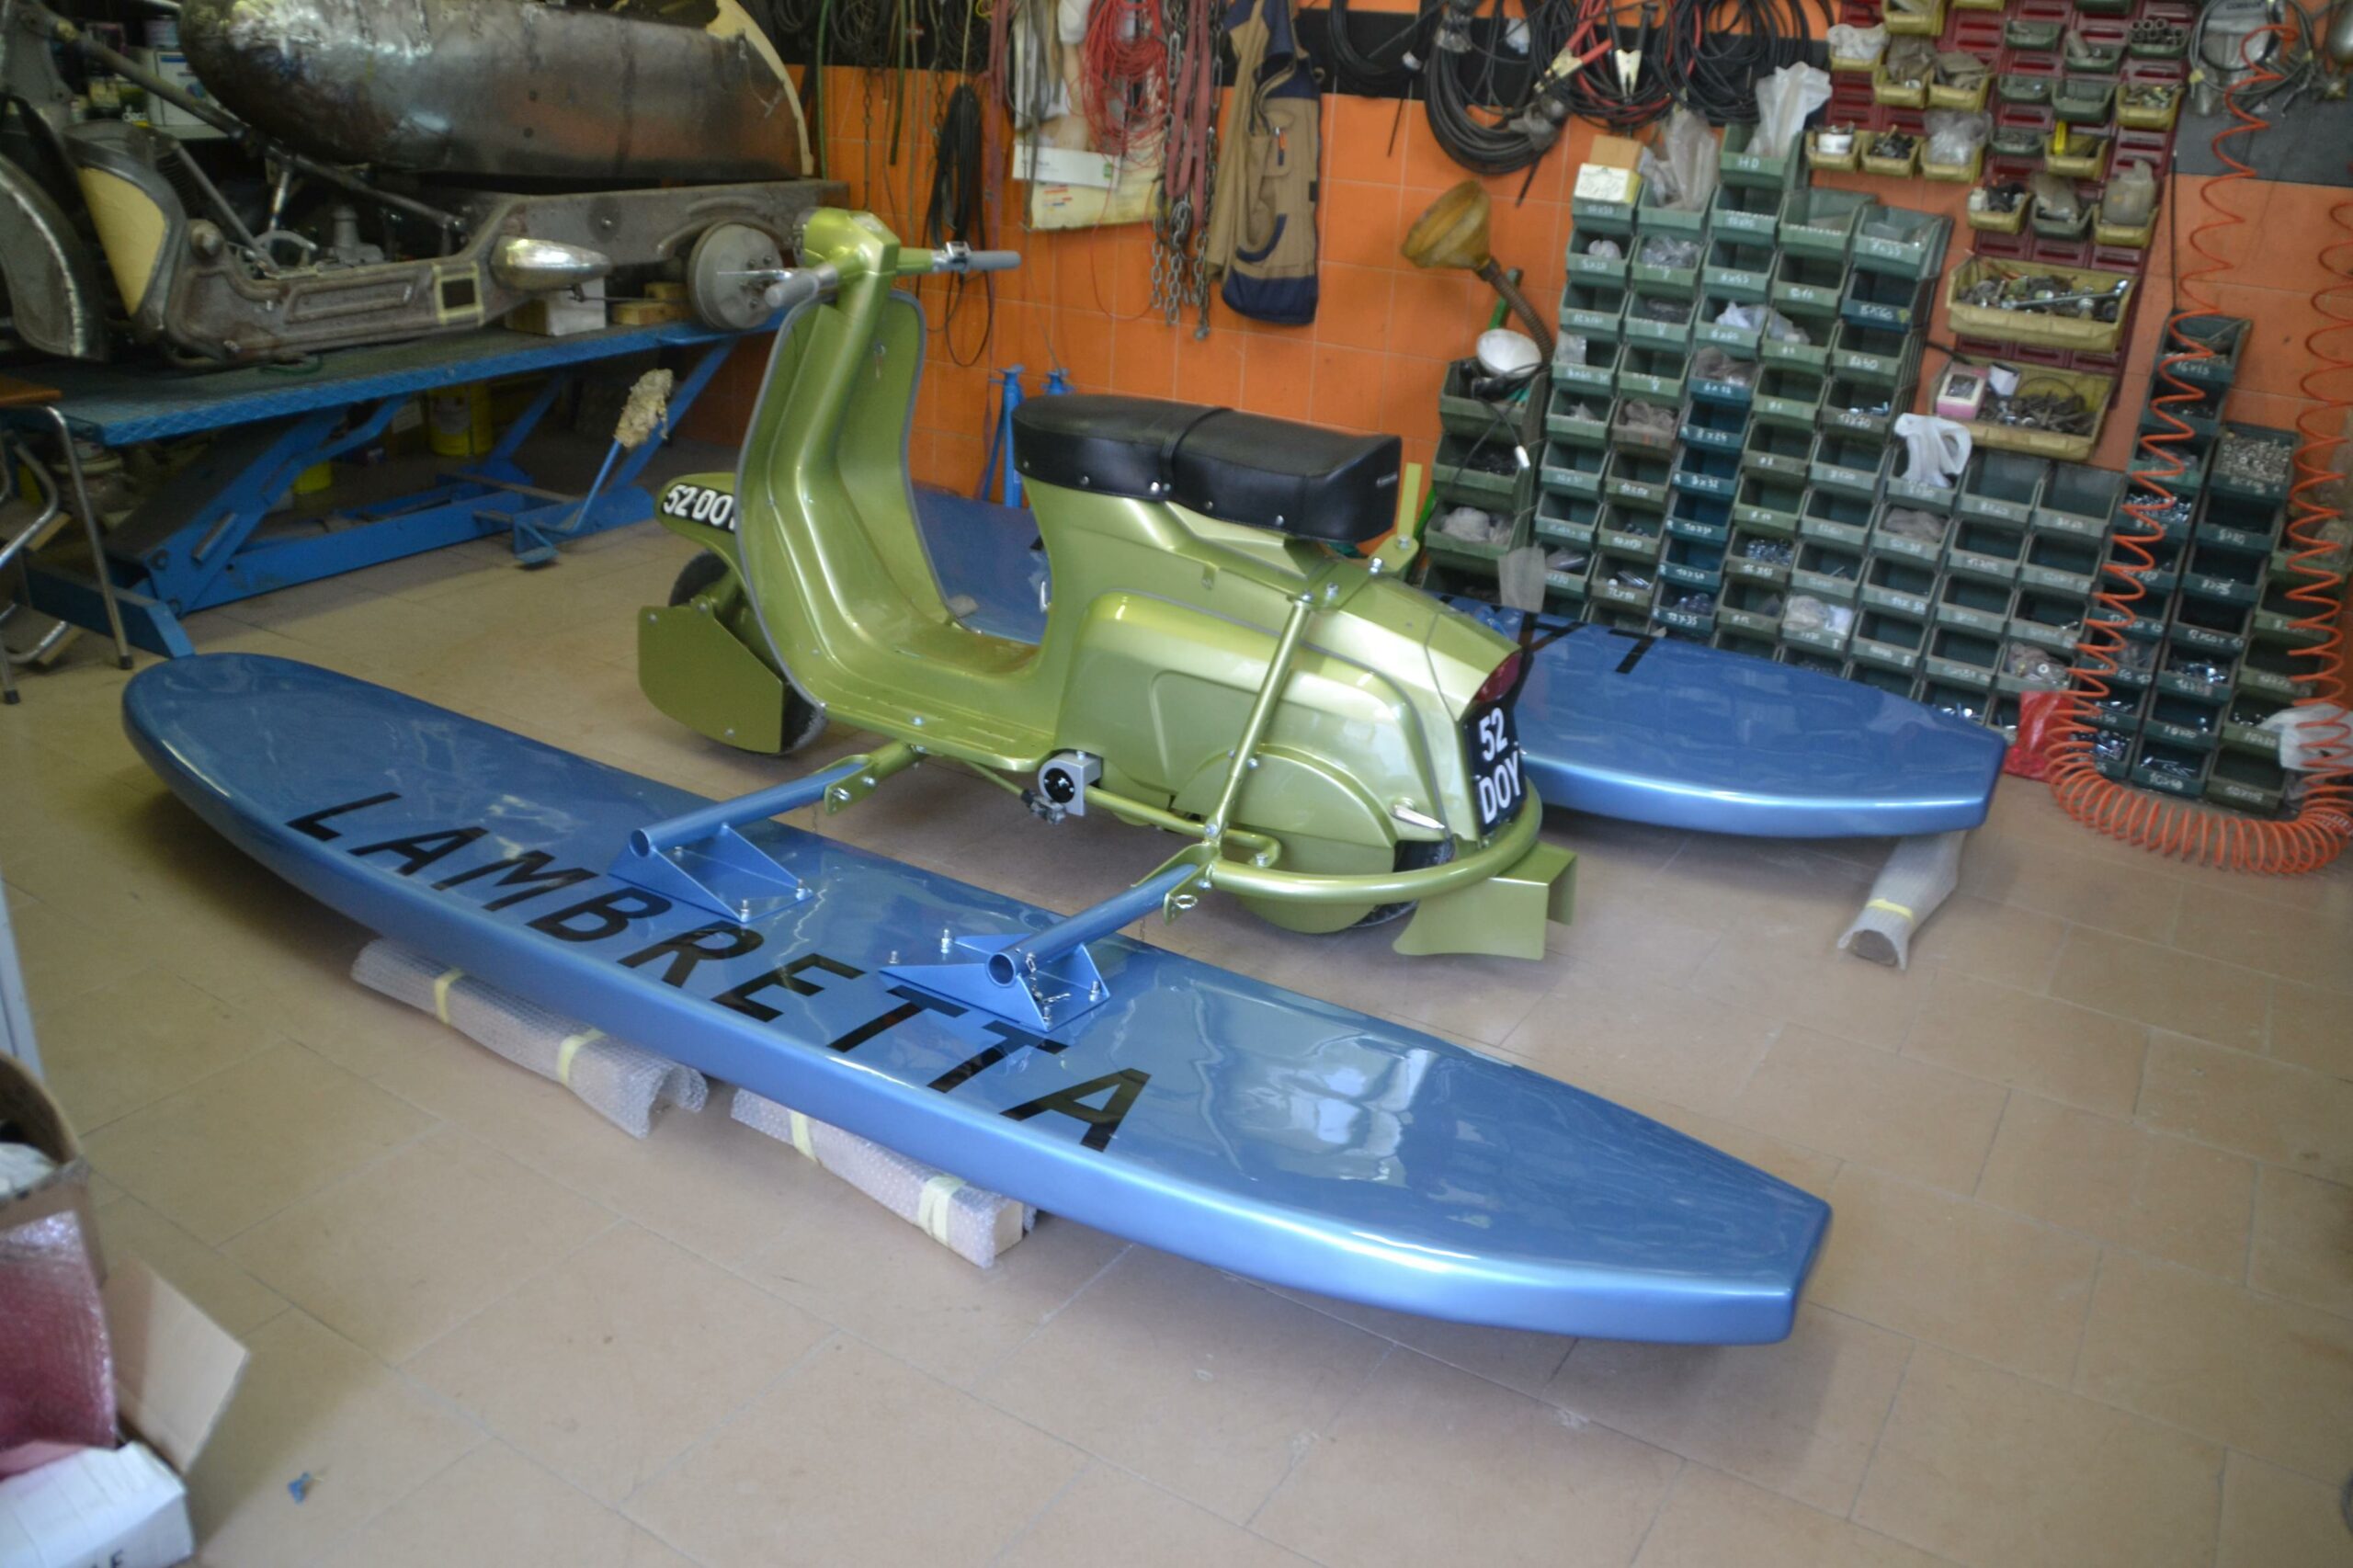 The Only Lambretta Amphi-Scooter In The World Is For Sale